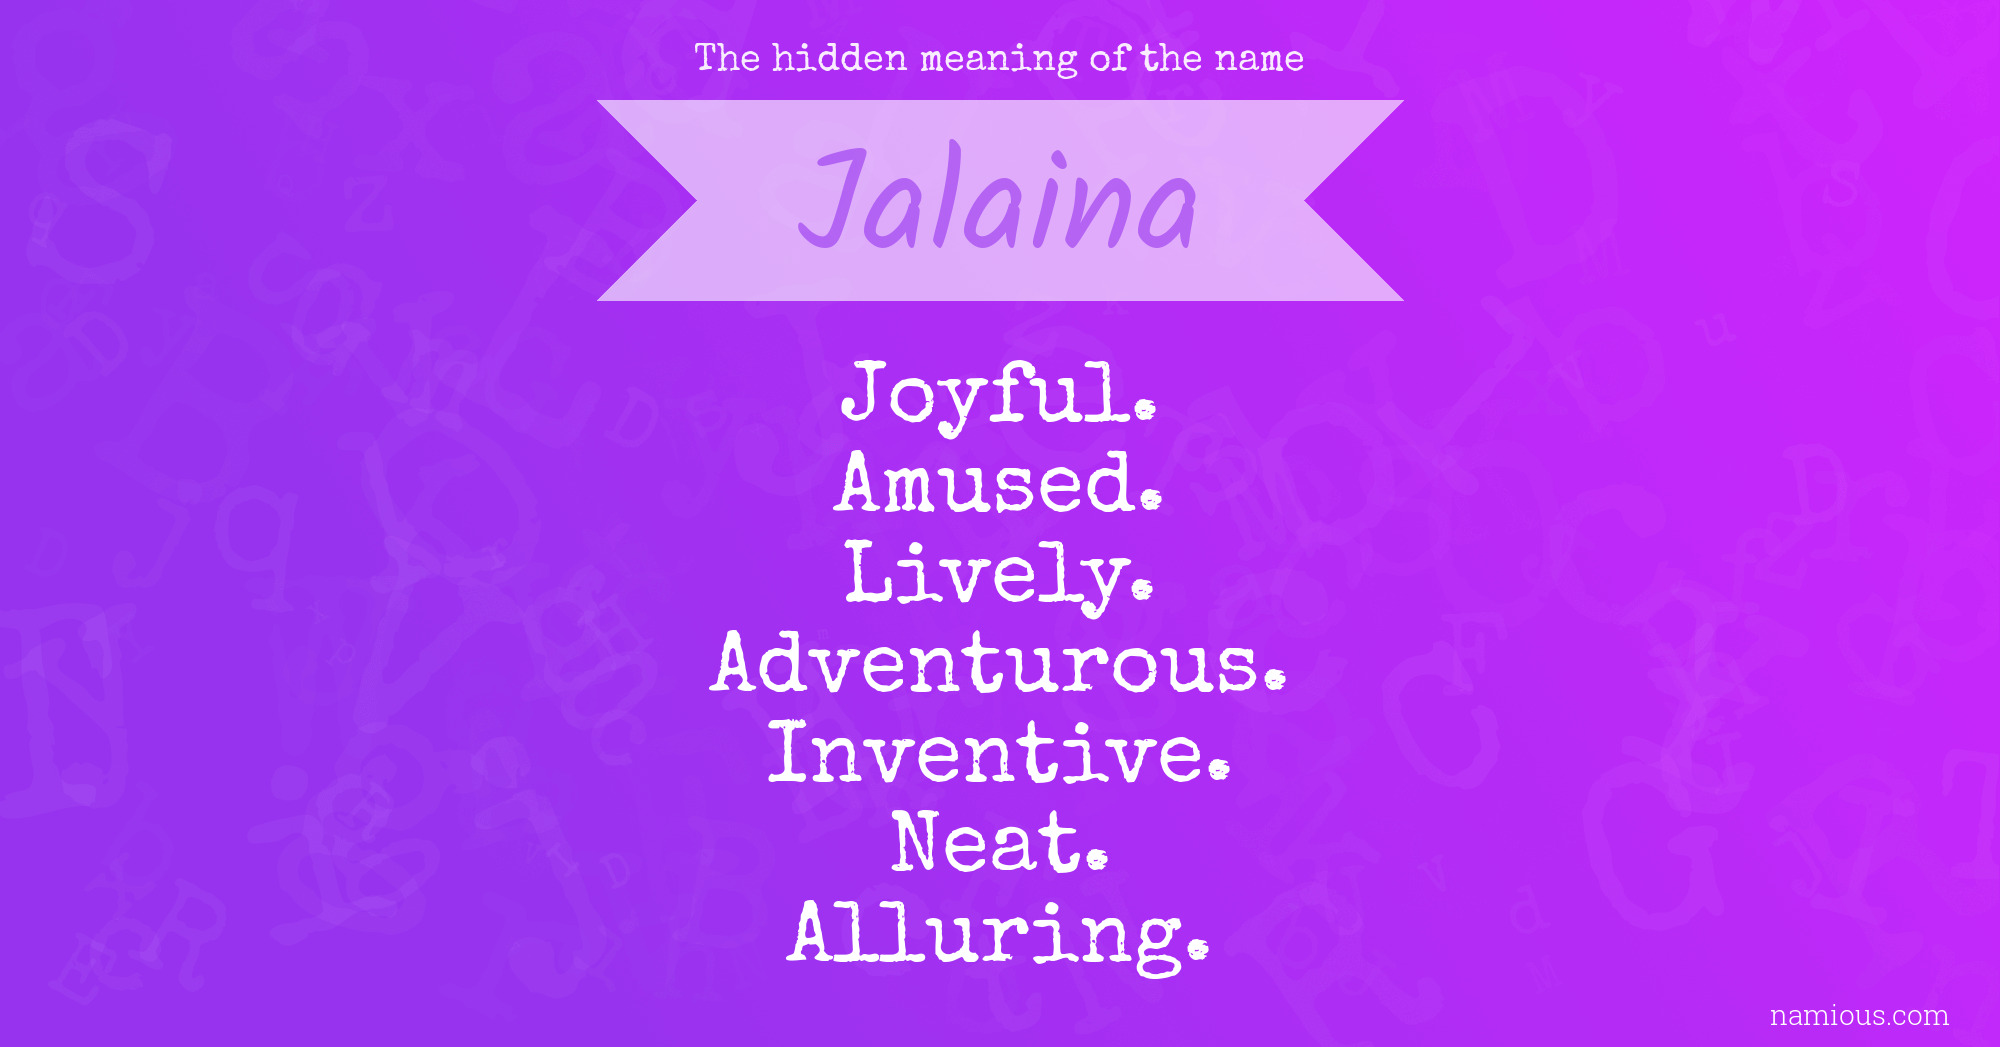 The hidden meaning of the name Jalaina